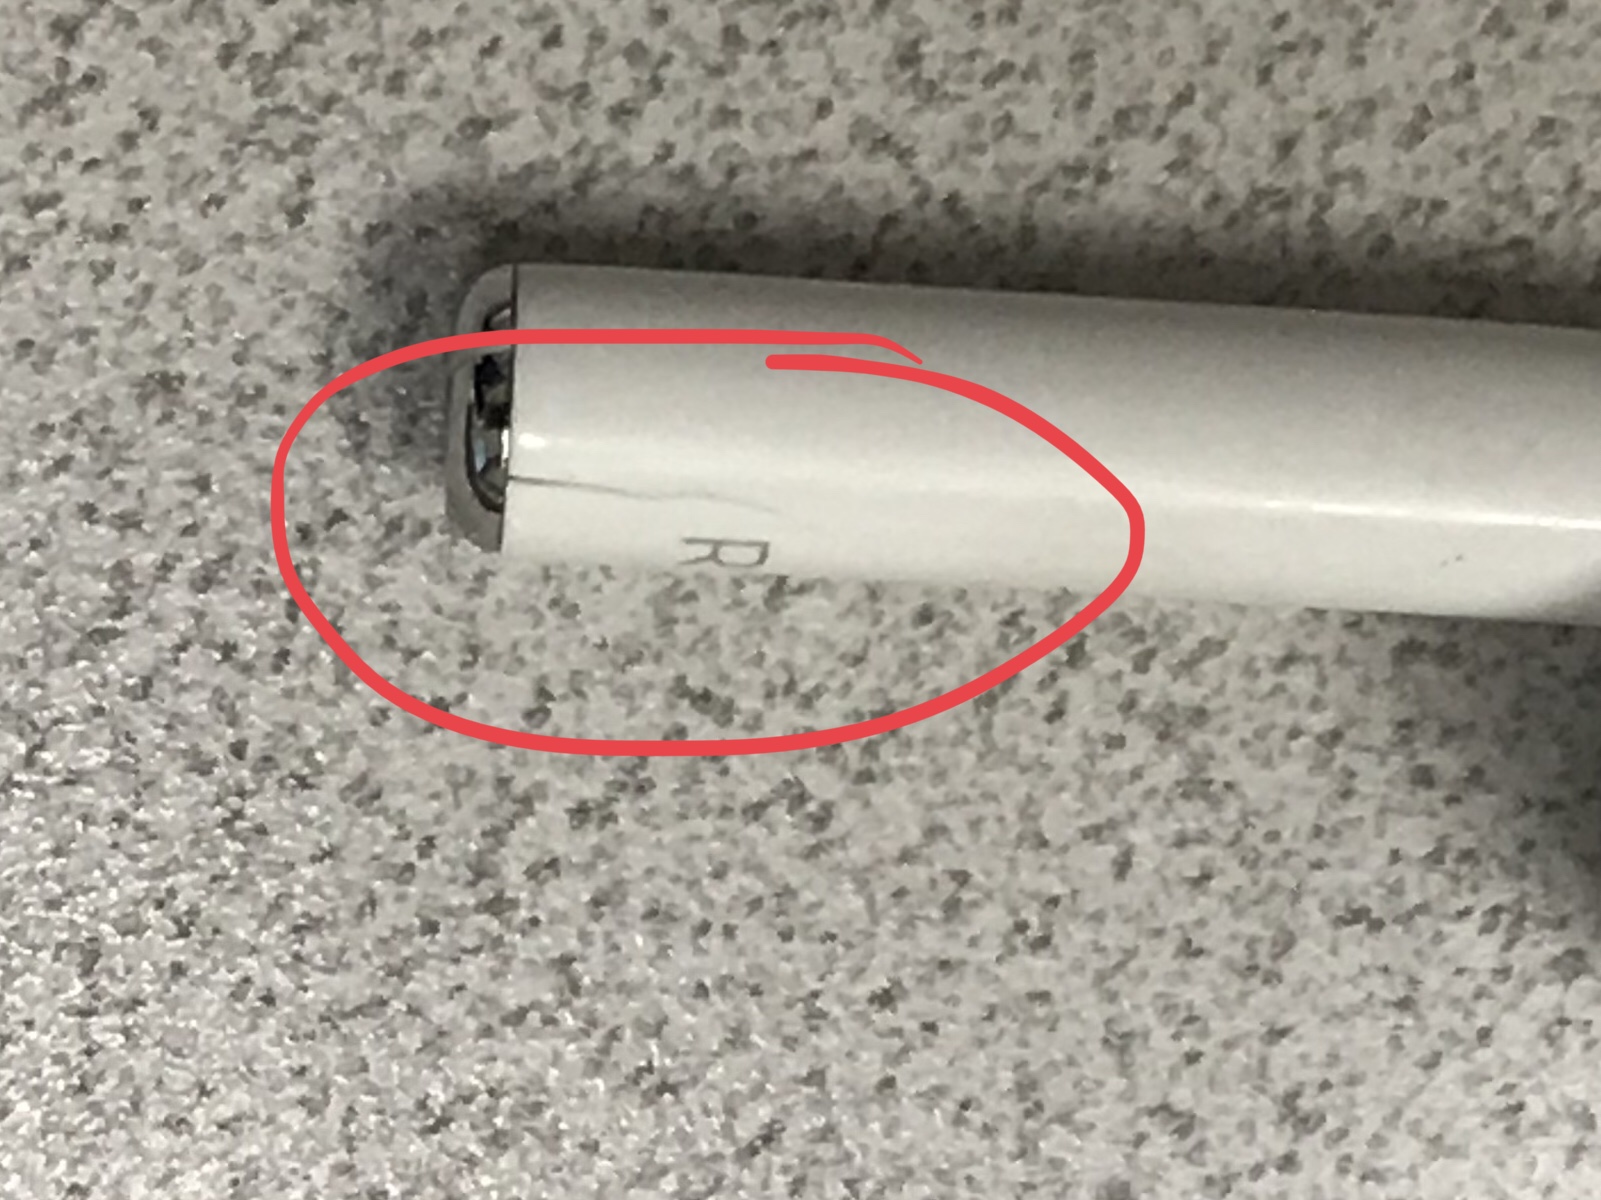 Hairline crack on airpods pro - Apple Community